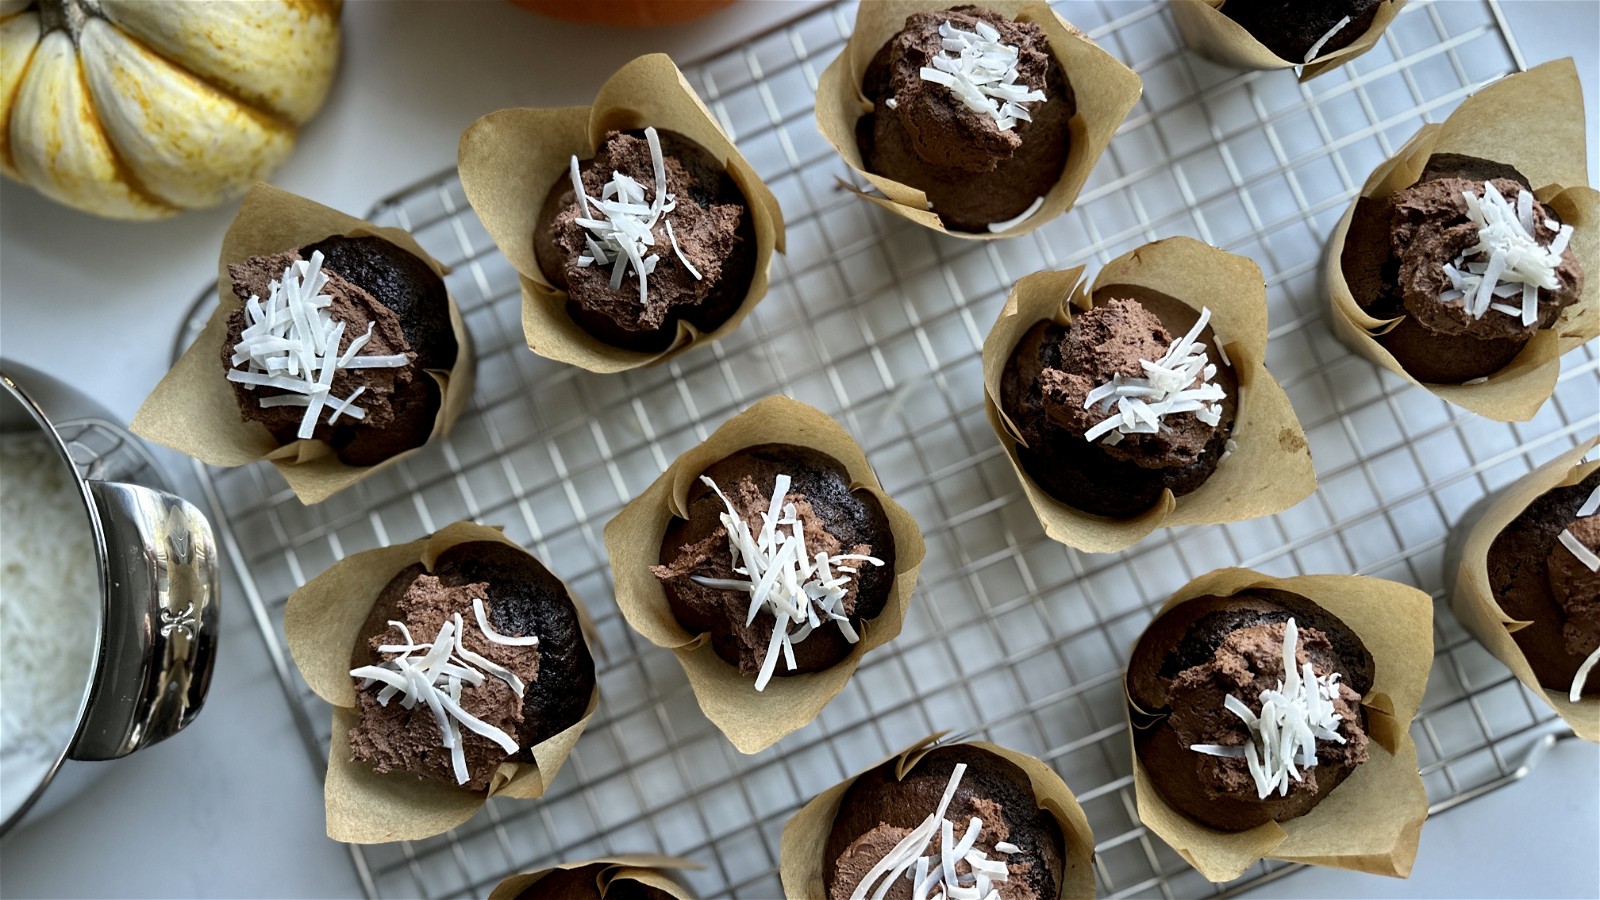 Image of Chocolate Chocolate Cupcakes with Coconut